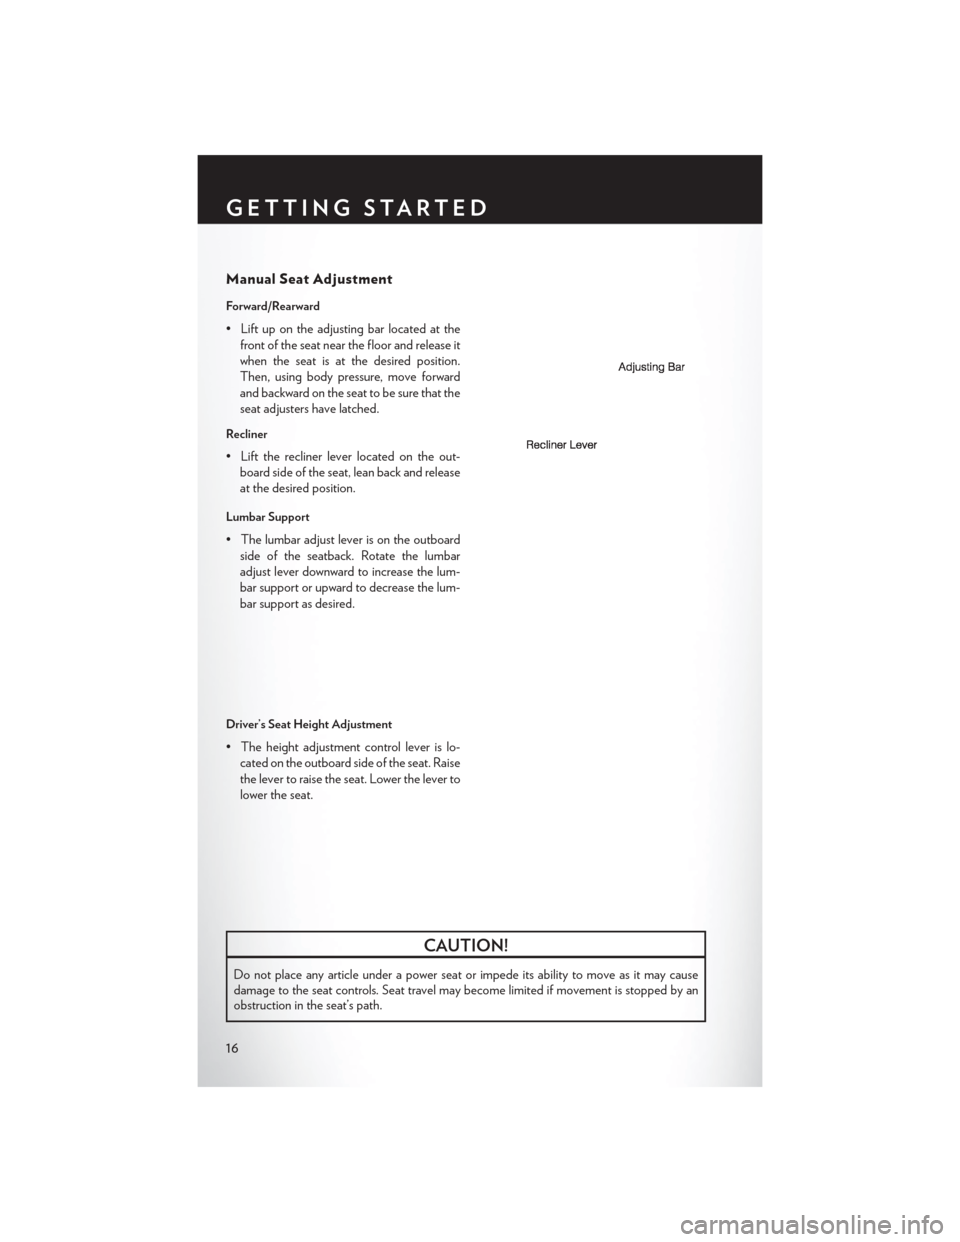 CHRYSLER 200 2014 1.G User Guide Manual Seat Adjustment
Forward/Rearward
• Lift up on the adjusting bar located at thefront of the seat near the floor and release it
when the seat is at the desired position.
Then, using body pressu